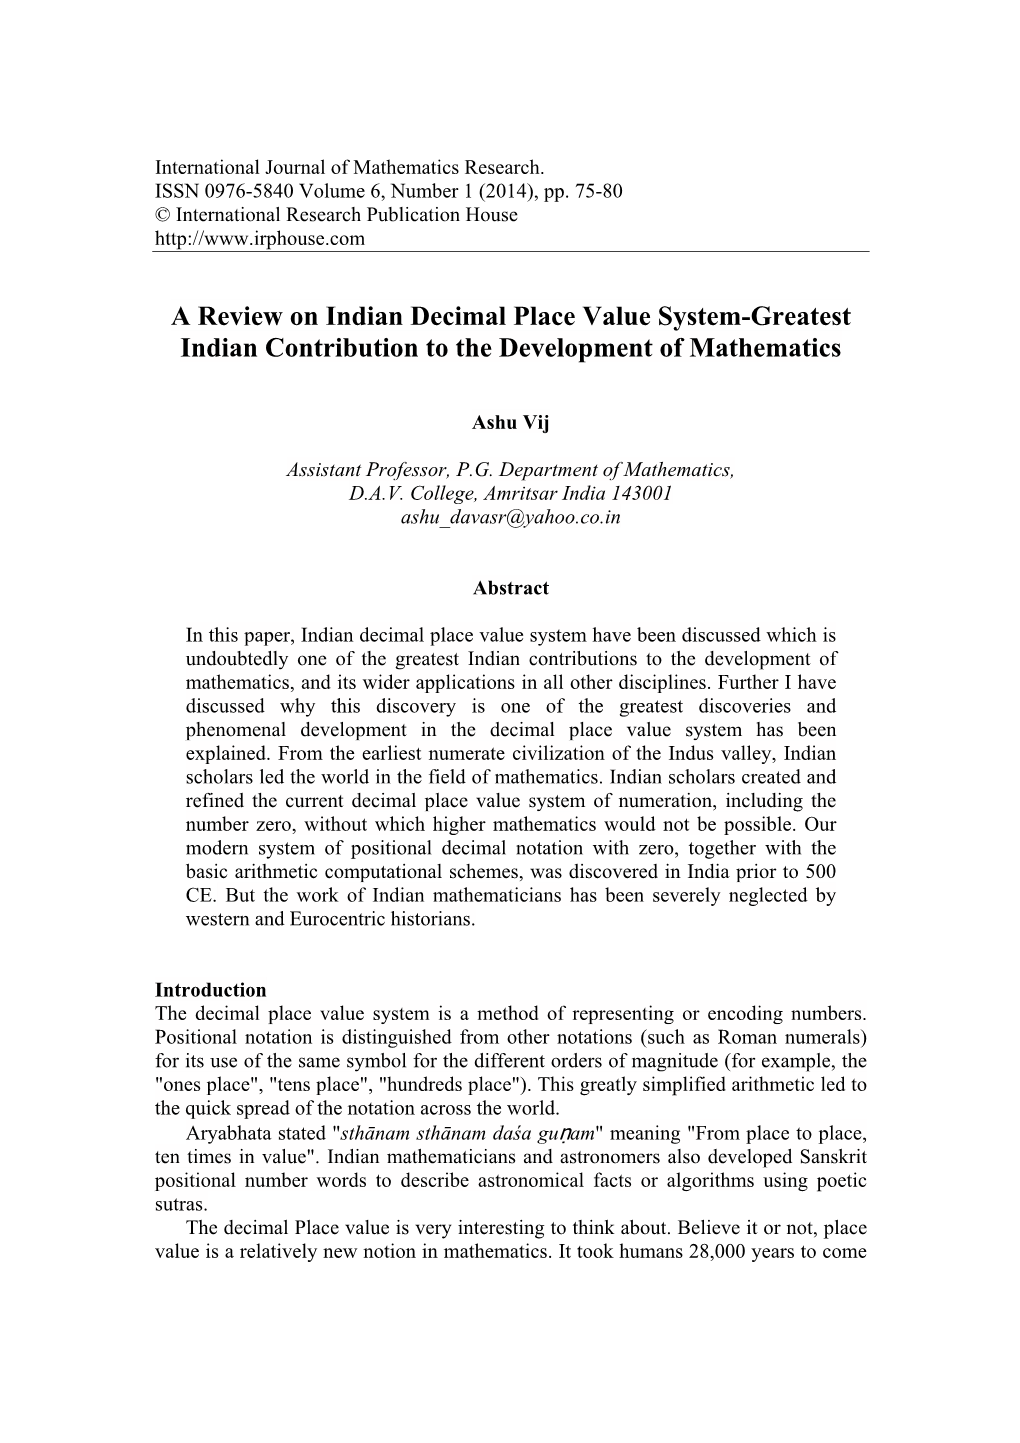 A Review on Indian Decimal Place Value System-Greatest Indian Contribution to the Development of Mathematics